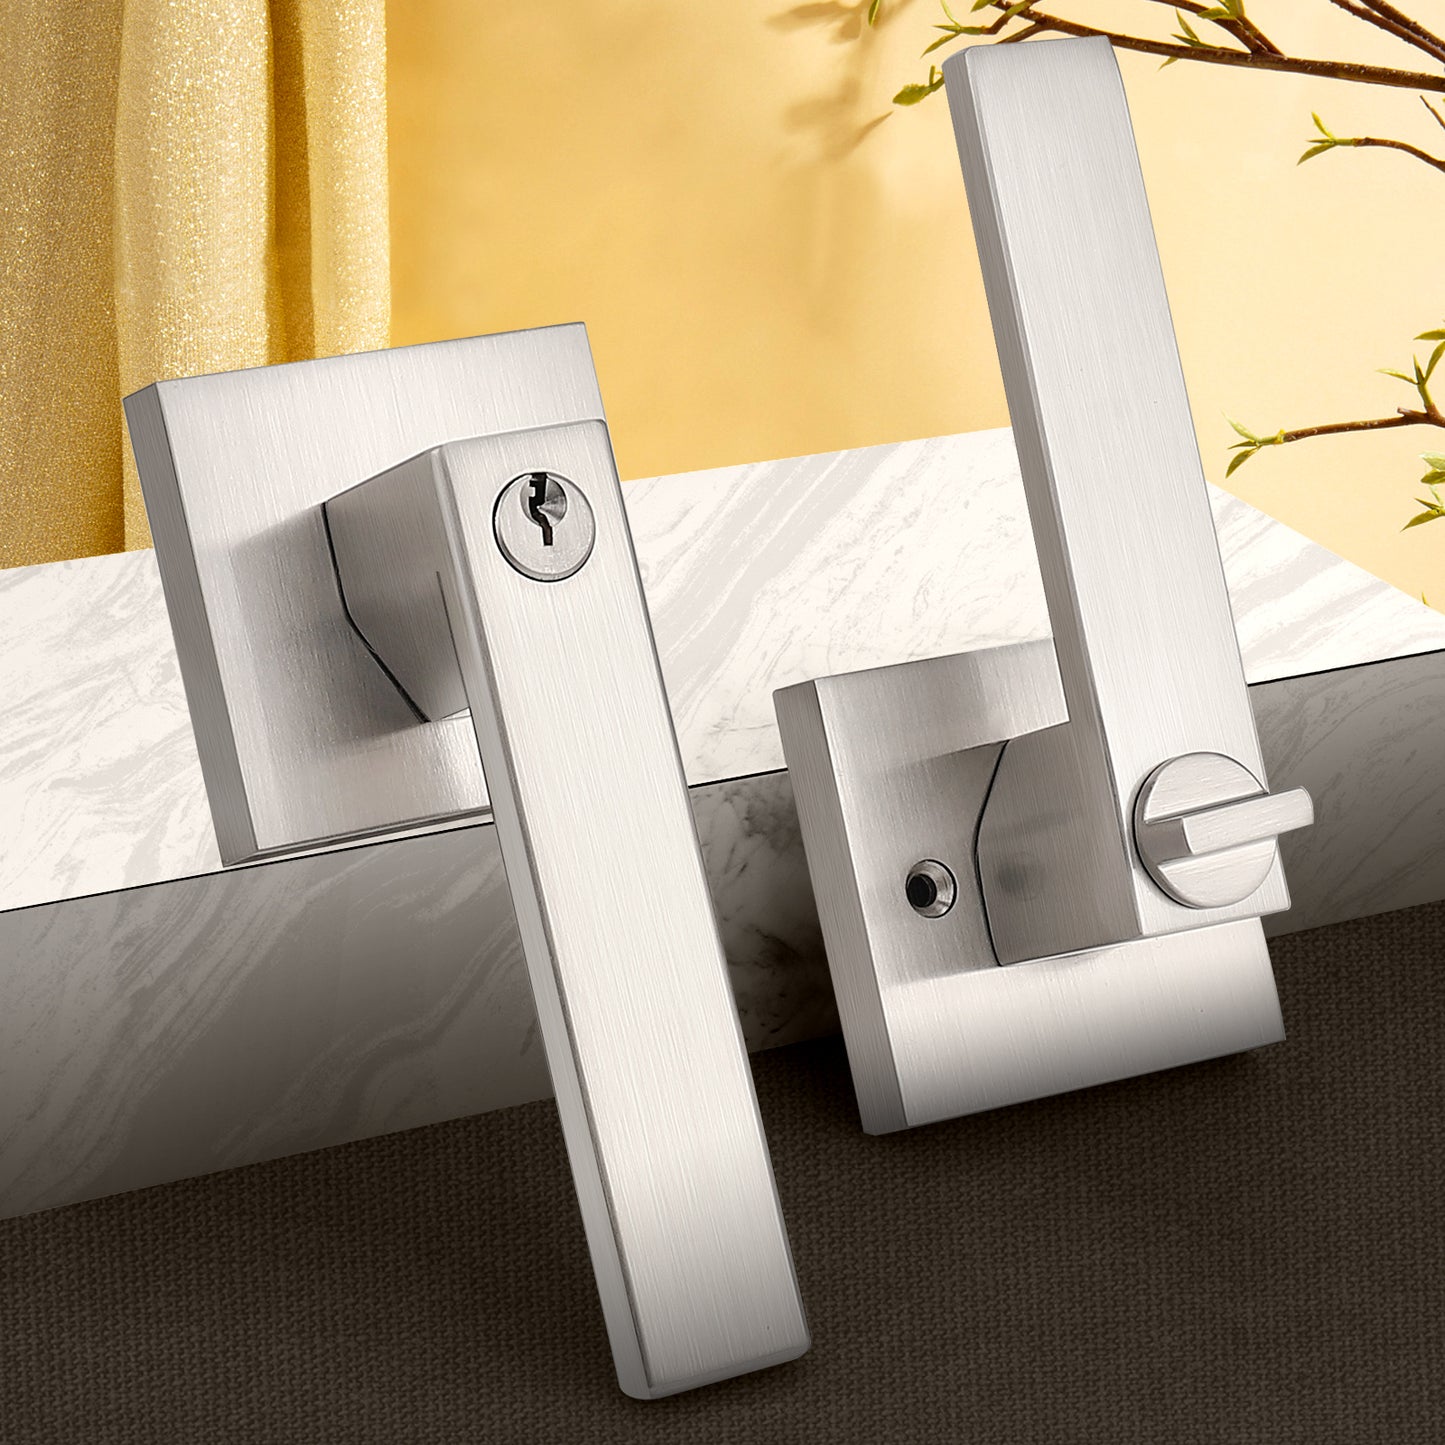 Heavy Duty Door Handles Brushed Nickel Finish, Entry Keyed Lock/ Privacy/Passage/Dummy Function, DL01SN - Probrico